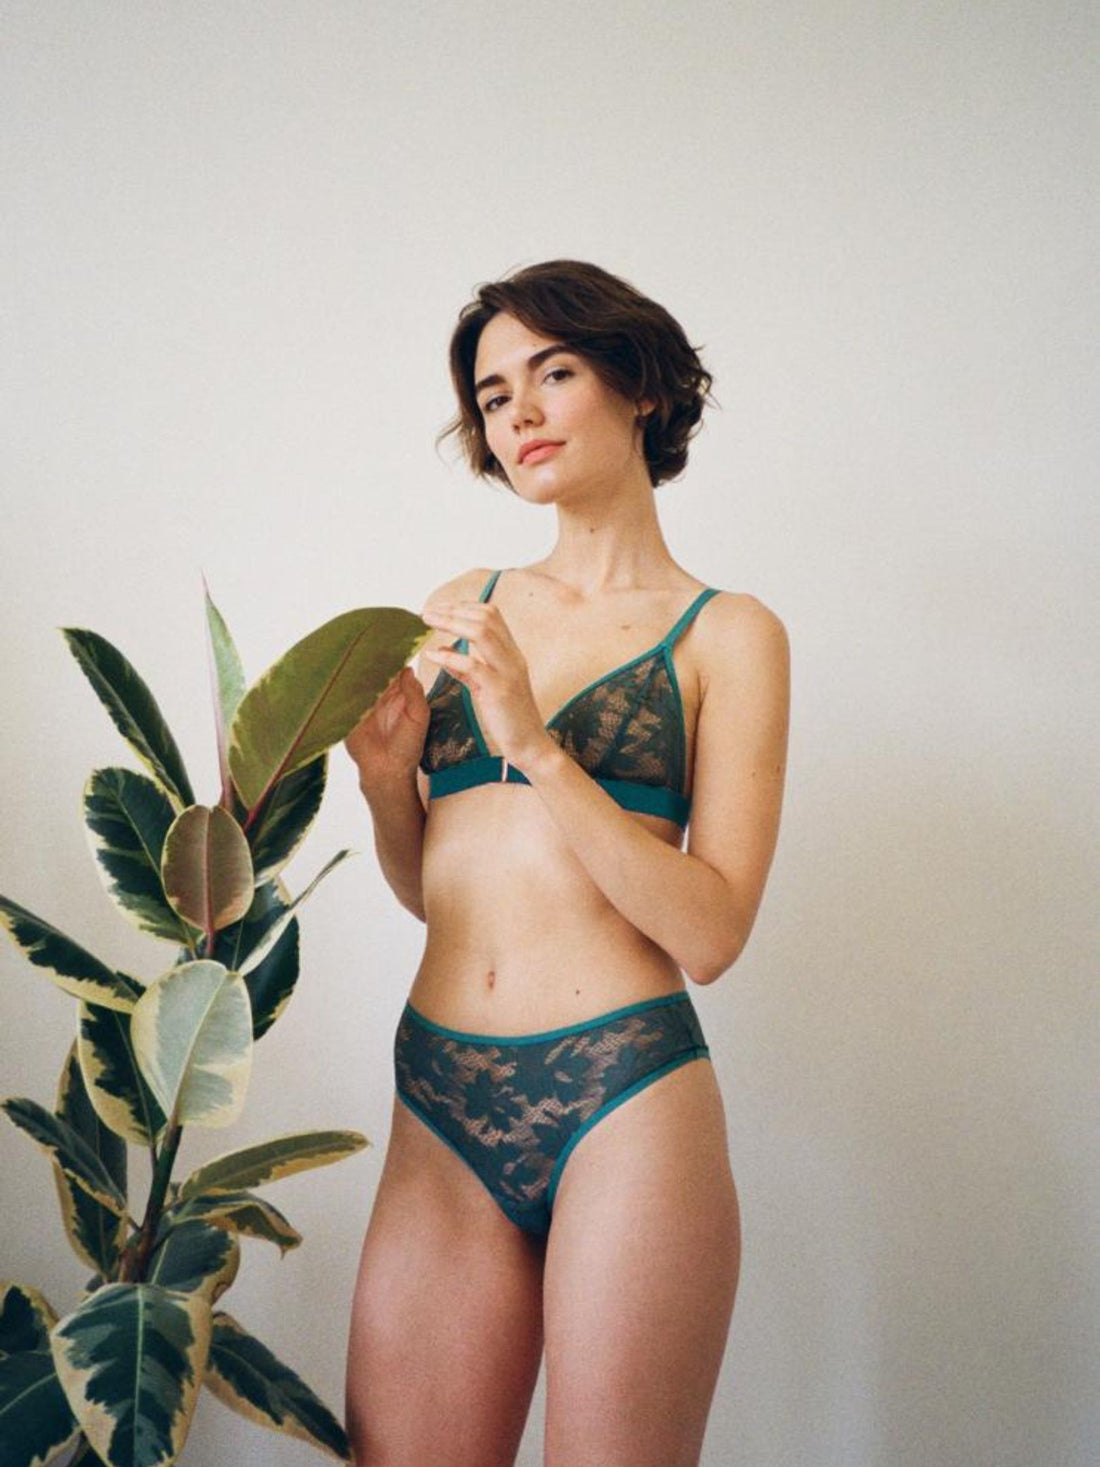 Model standing next to plant wearing Semiromantic Lingerie set made from Green lace.